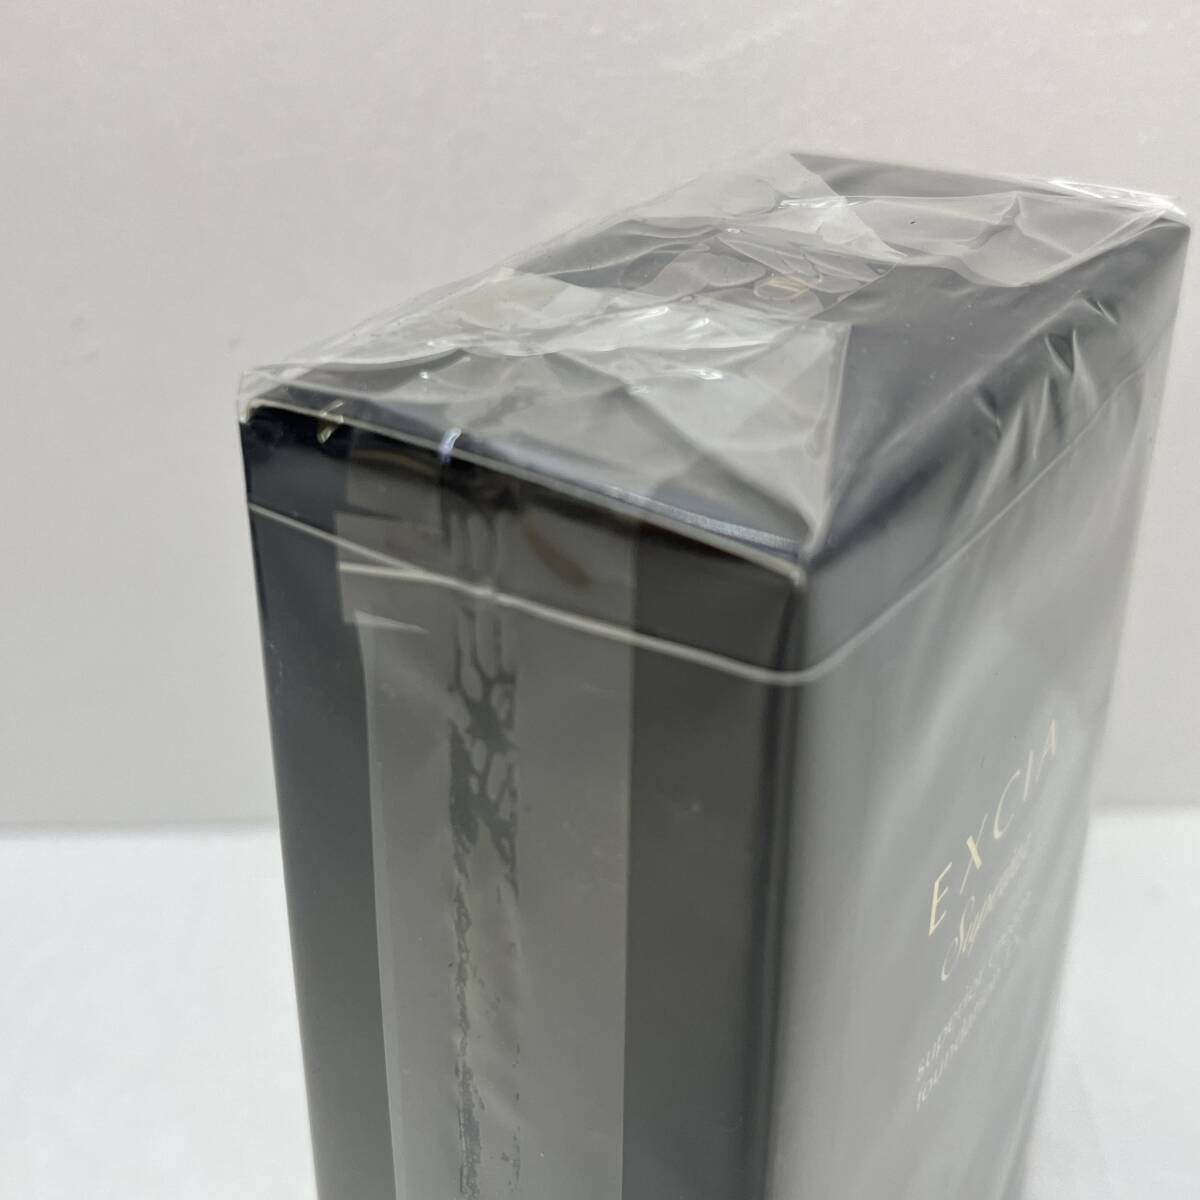 [DHS2107ST]* unopened * ALBION EXCIA Albion e comb aAL Hsu pe rear cream foundation EX NA201 30g cosmetics cosme 